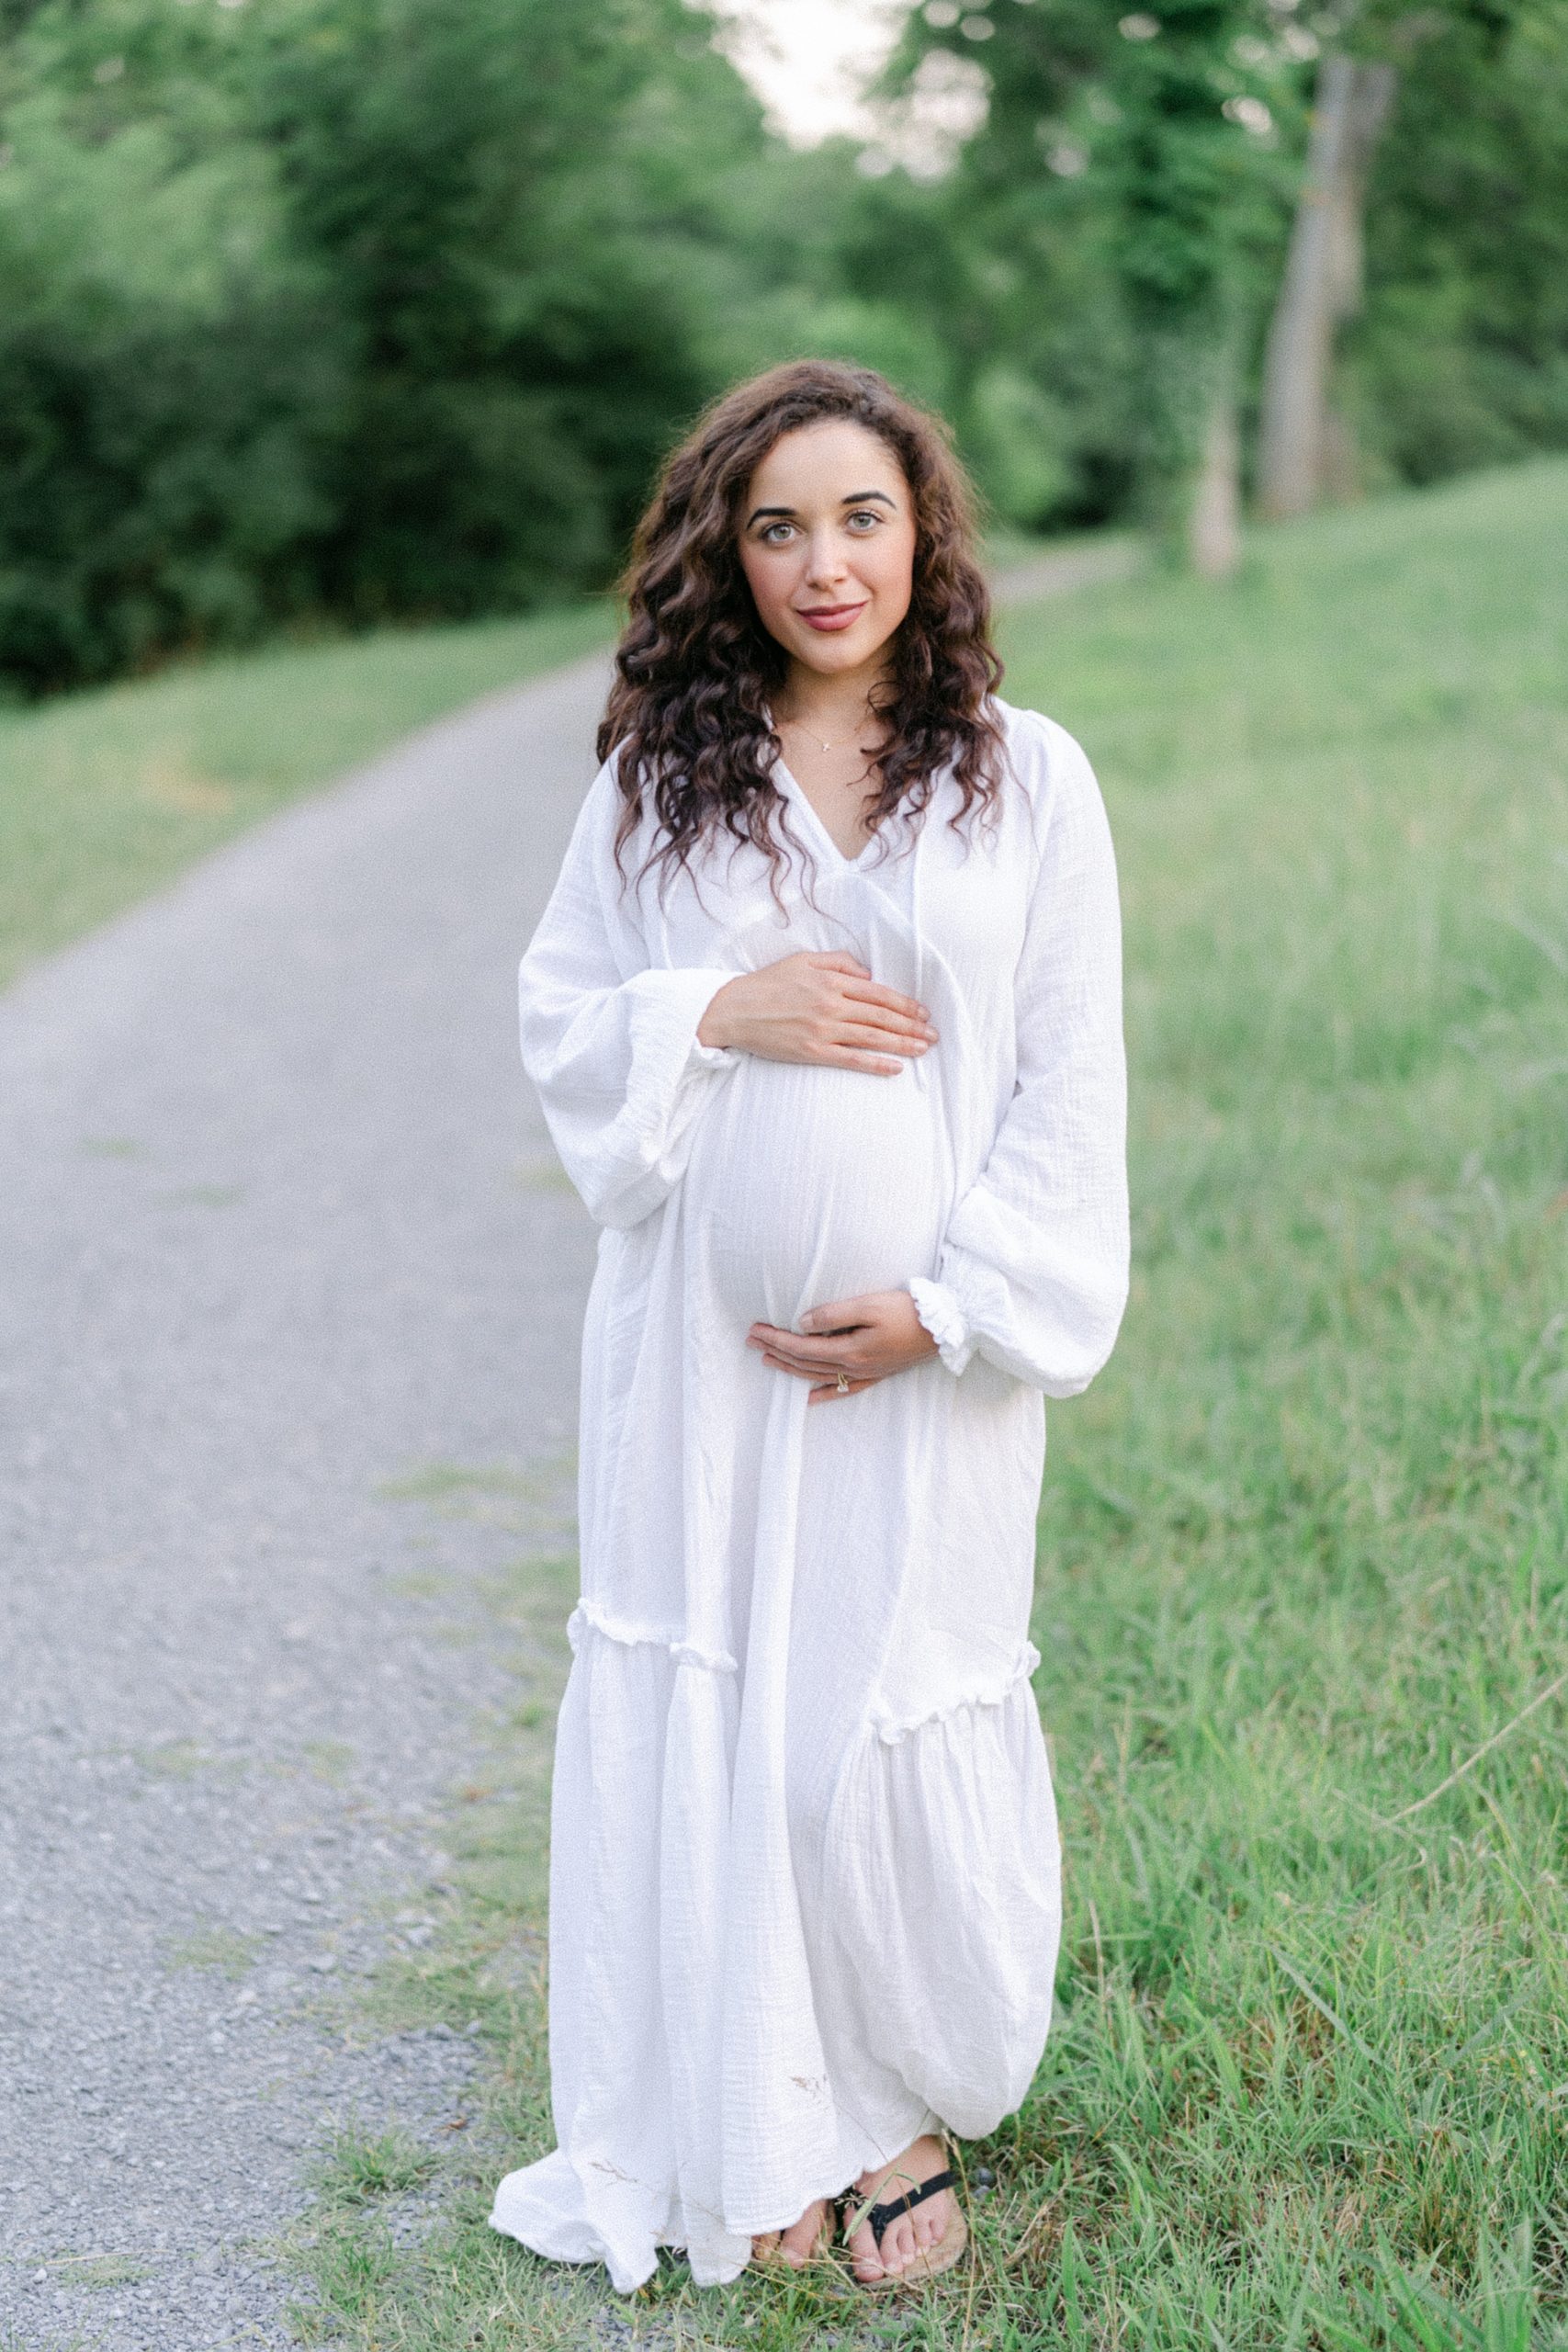 Pregnant woman holds baby bump during Maternity session